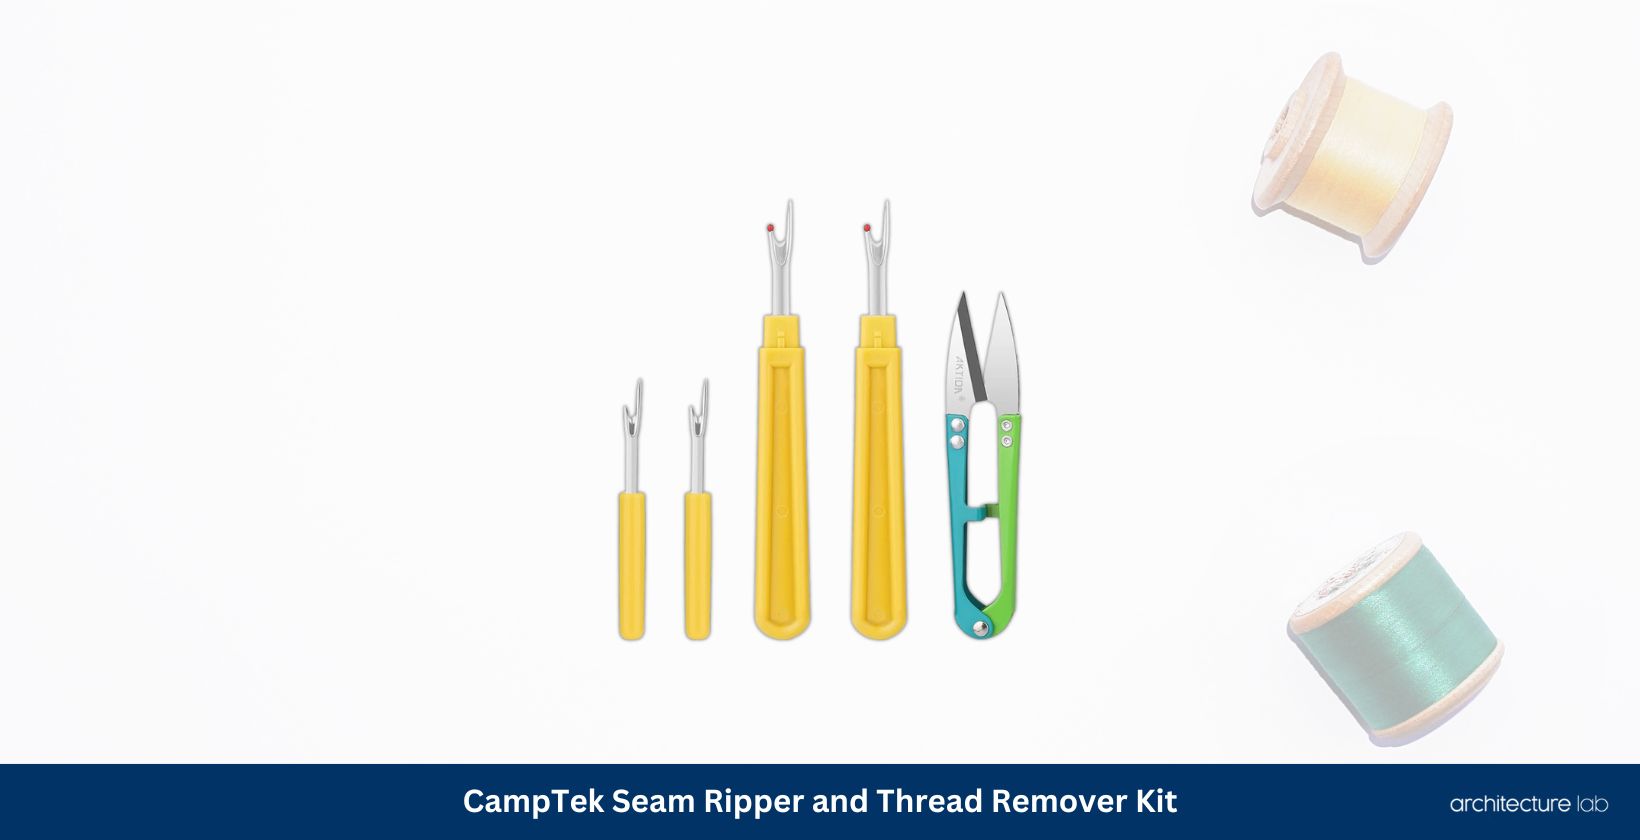 Camptek seam ripper and thread remover kit cmt1009 yellow